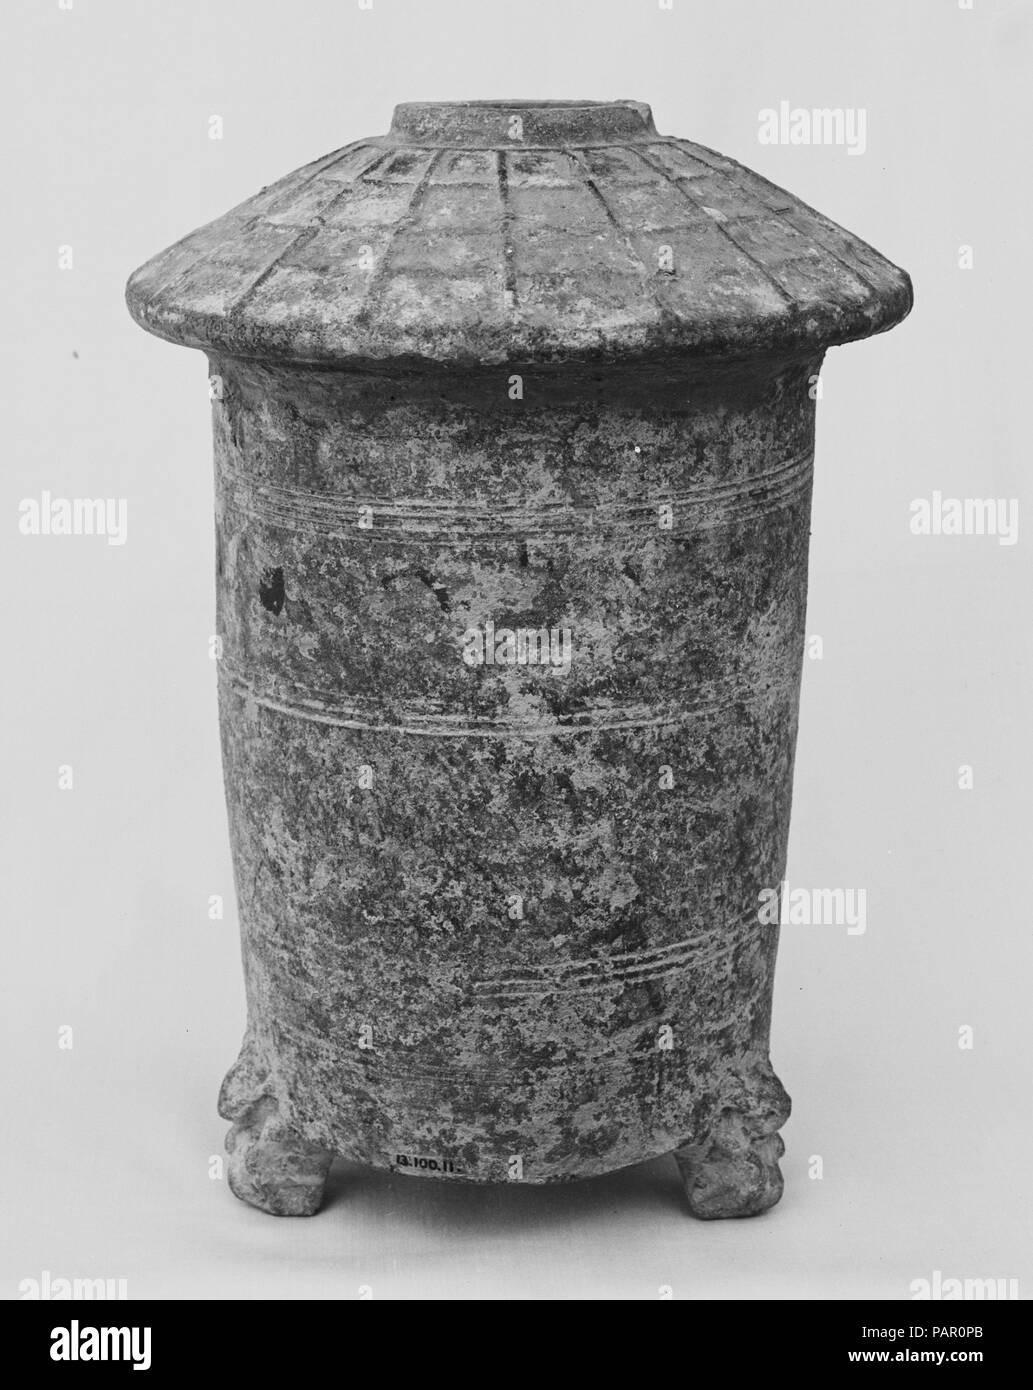 Granary Tower. Culture: China. Dimensions: H. 12 1/8 in. (30.8 cm); Diam. 8 1/4 in. (21 cm). Date: 1st-early 3rd century.  Pottery models of houses and farm structures were commonly included in Eastern Han burials to provide for the afterlife. Museum: Metropolitan Museum of Art, New York, USA. Stock Photo